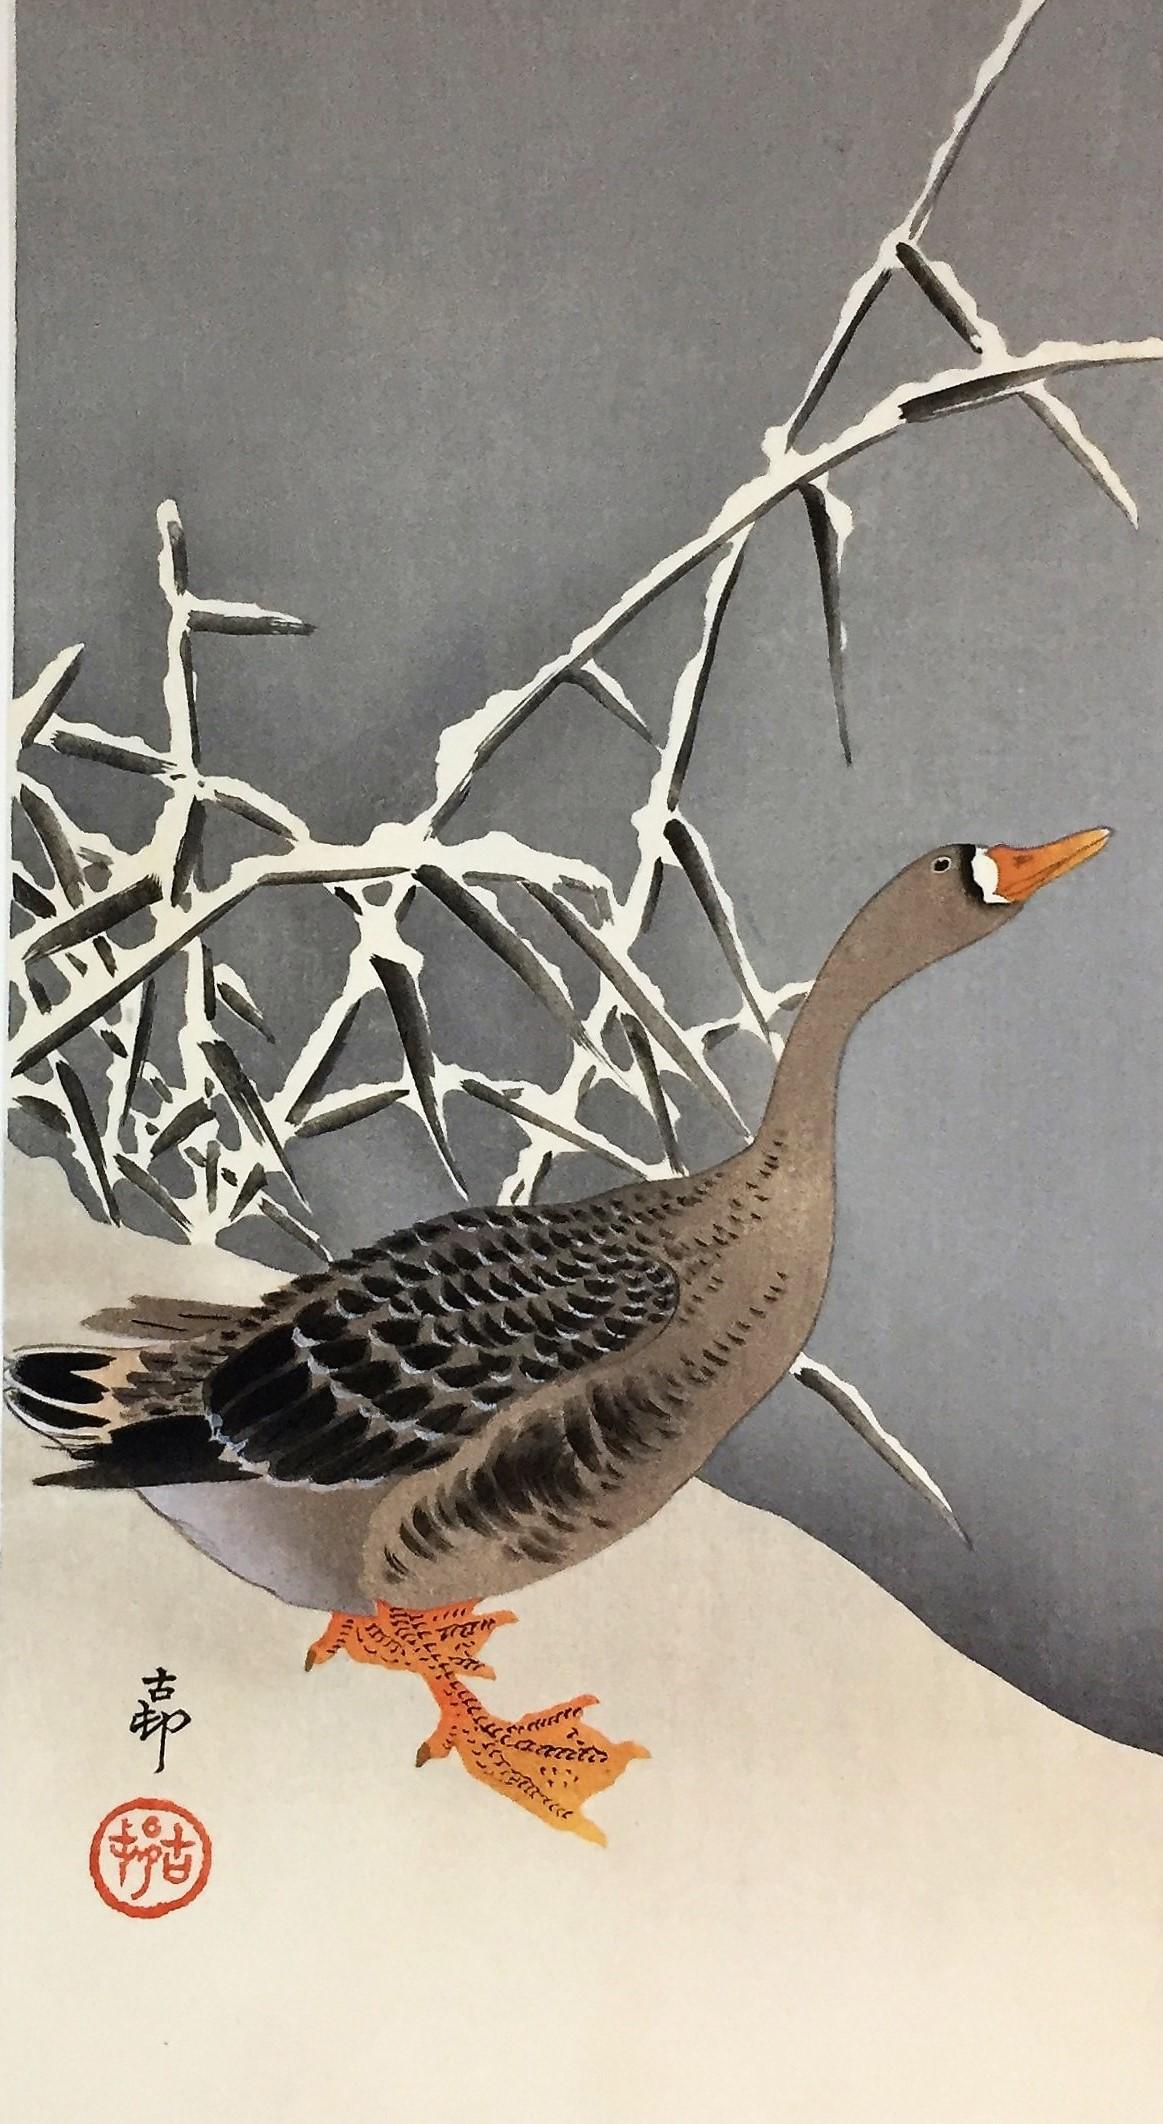 Goose and Reeds. Otanzaku:13 1/2 x 7 1/4. Illustrated: Newland, Crows, Cranes & Camellias, K11.9, catalog 41, pages 66, 174. Signed and sealed Koson. An excellent impression with subtle bokashi shading througout, and gauffrage on the birds' feathers